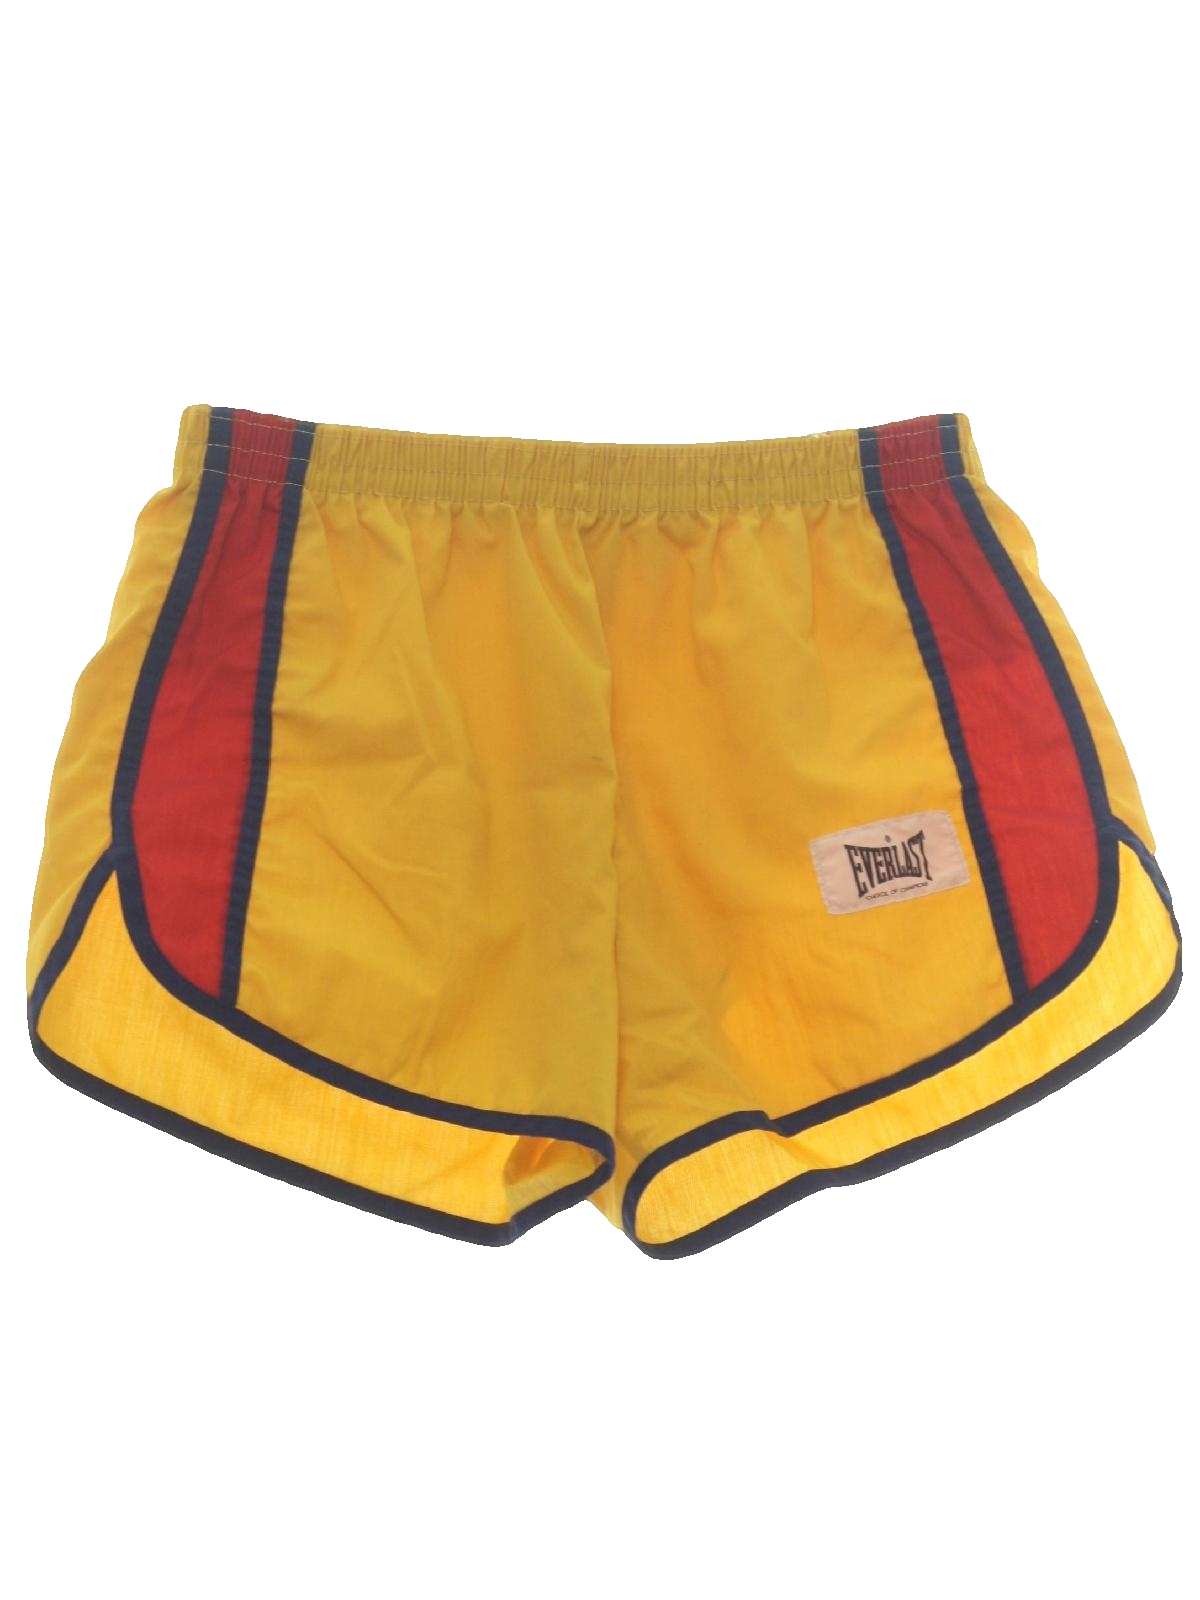 70's Everlast Shorts: 70s -Everlast- Mens gold, red and navy blue ...